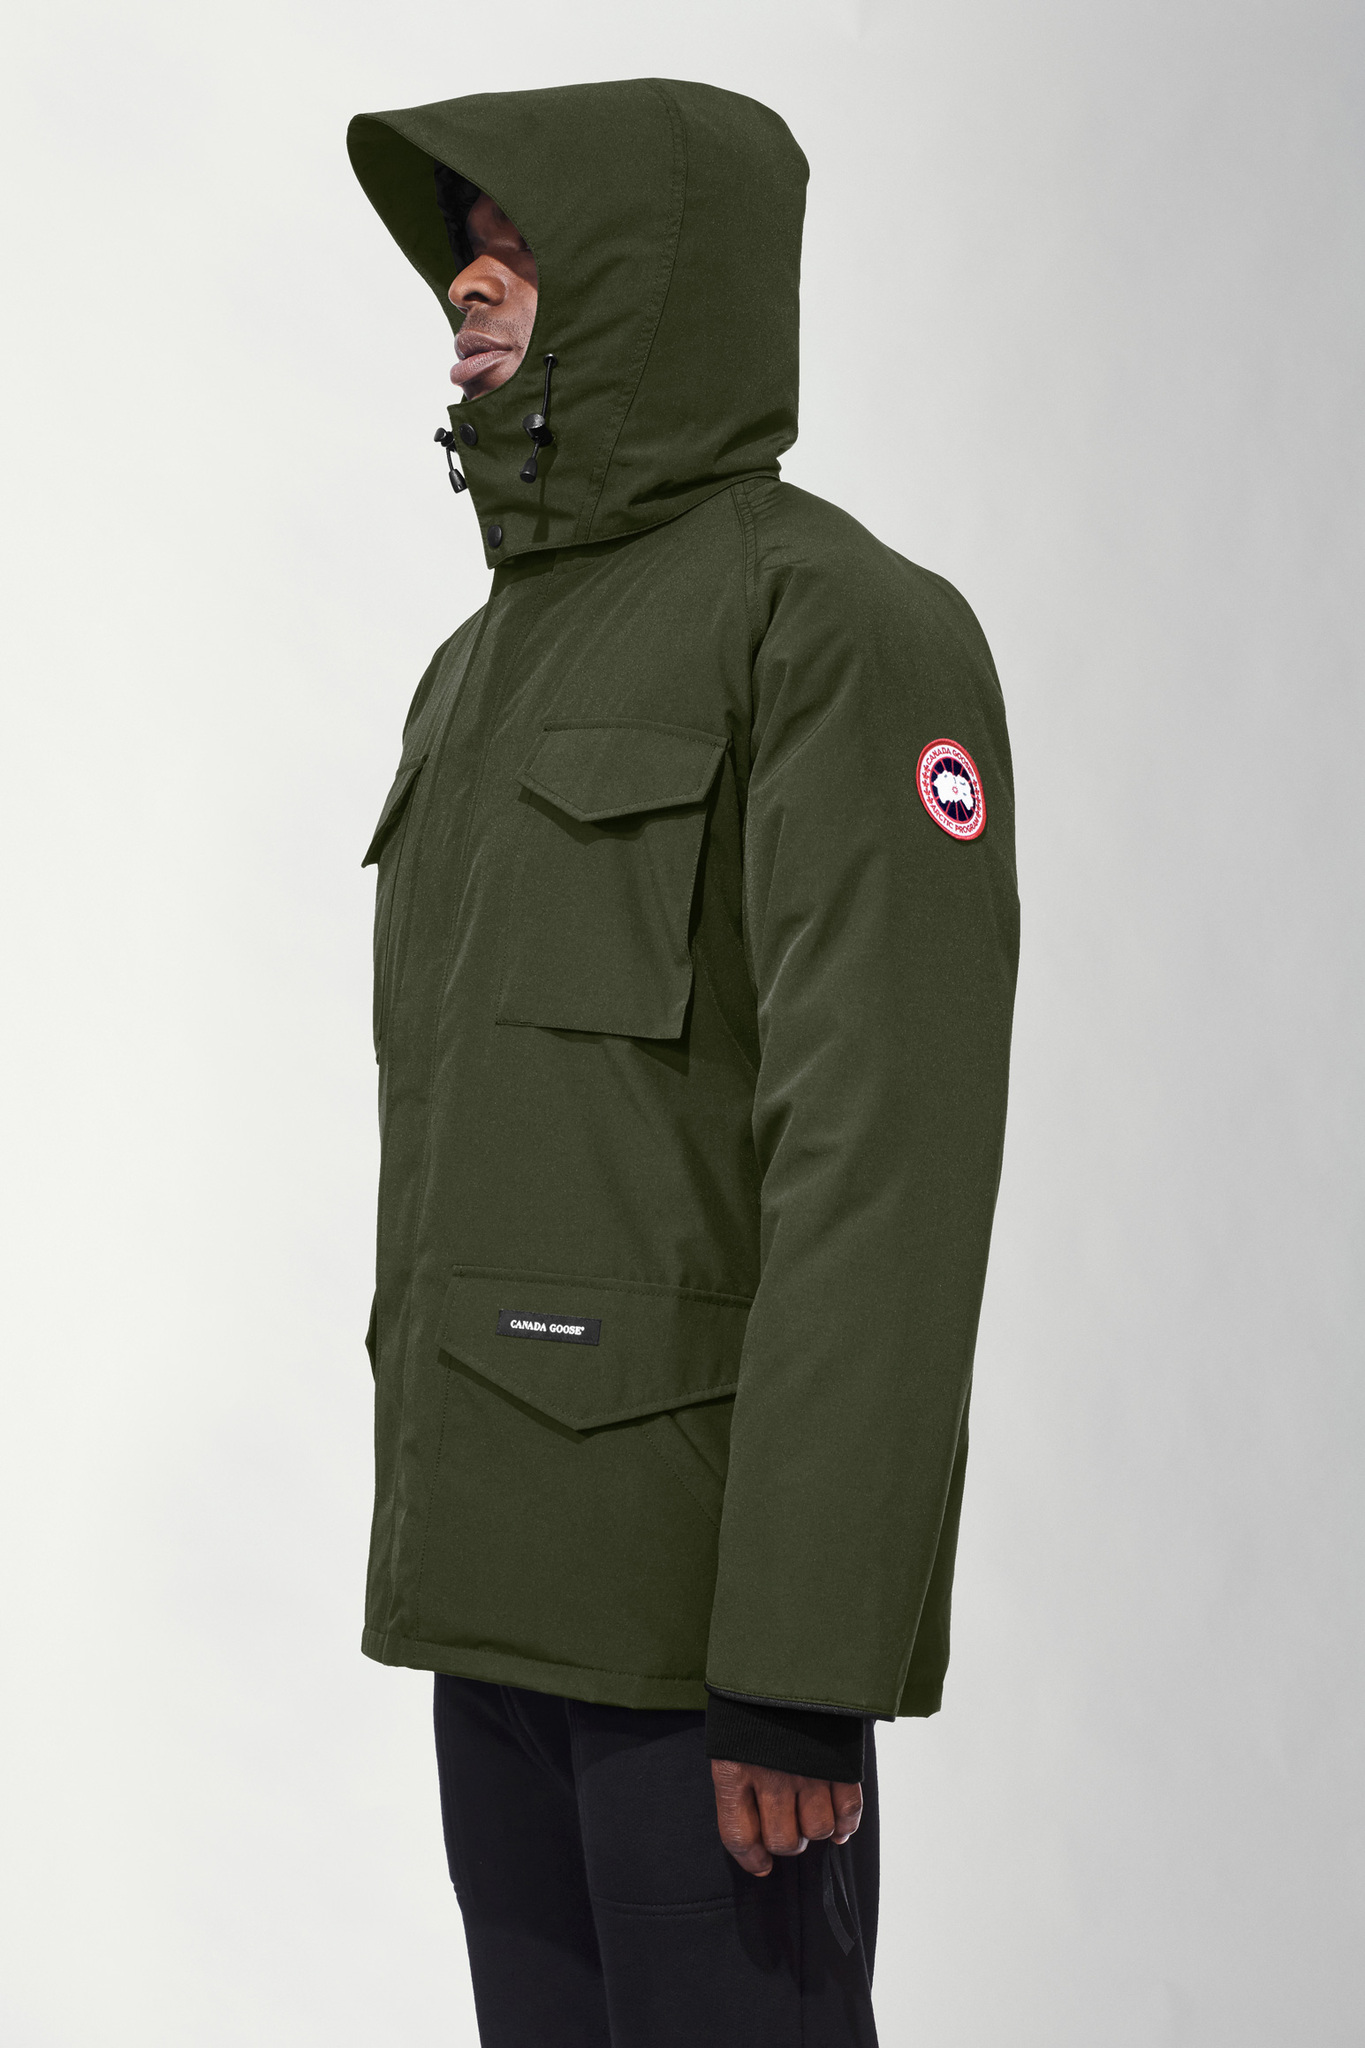 Canada Goose Parka - Weaver and Trading